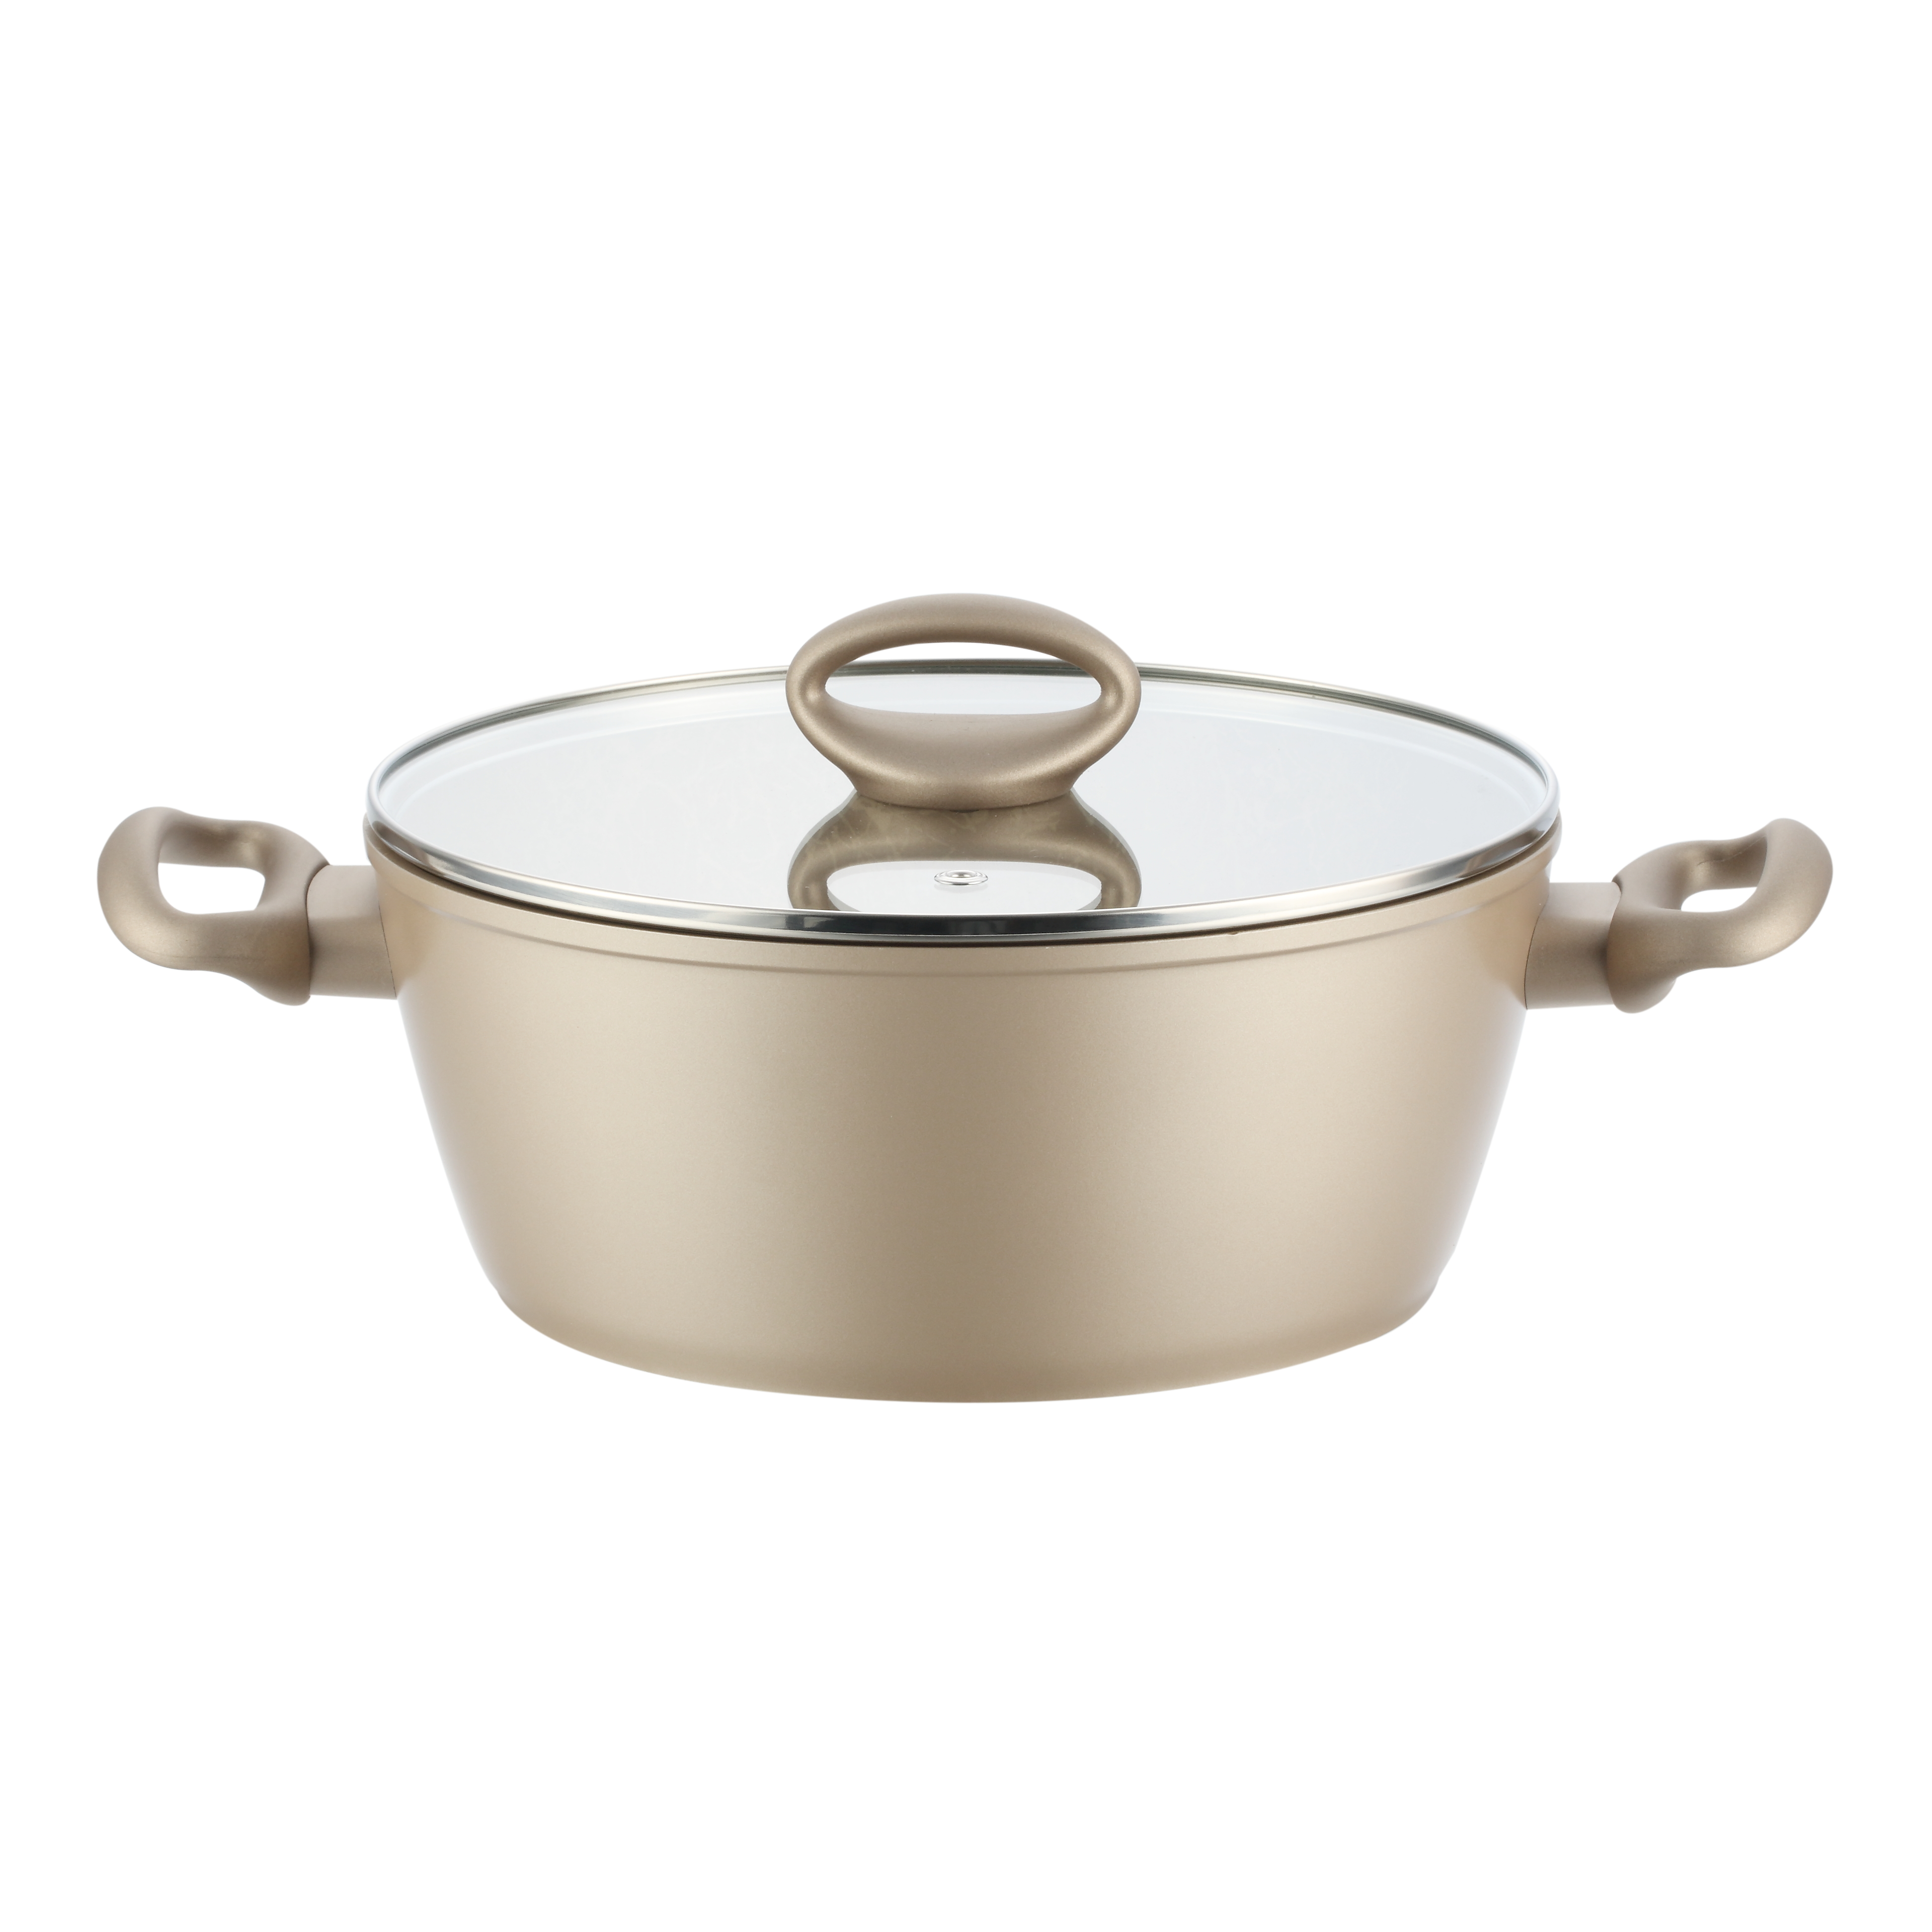 Desert Eif Non-stick Coating Casserole with Lid High Quality Aluminum Cookware with Induction Dishwasher Safe PFOA-Free LFGB FDA